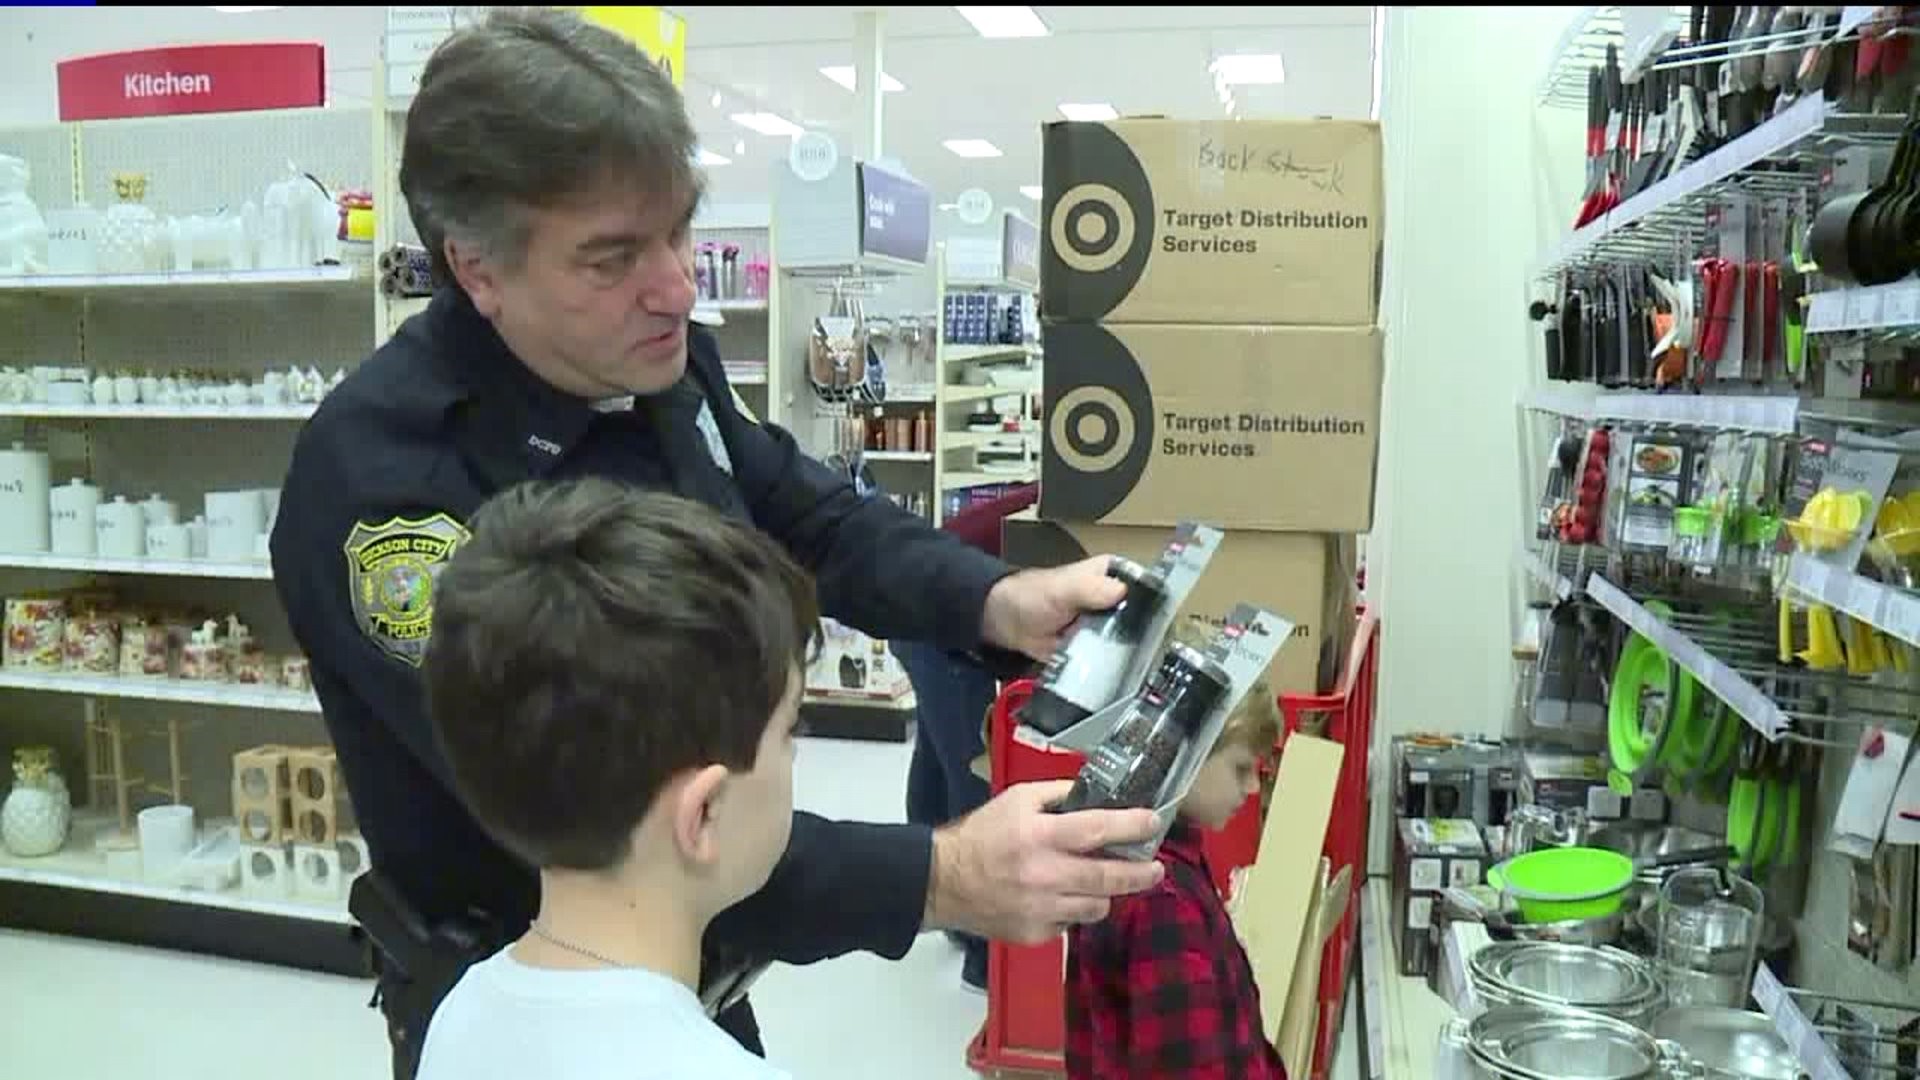 Police Act as Santa's Helpers During Shopping Spree for Kids